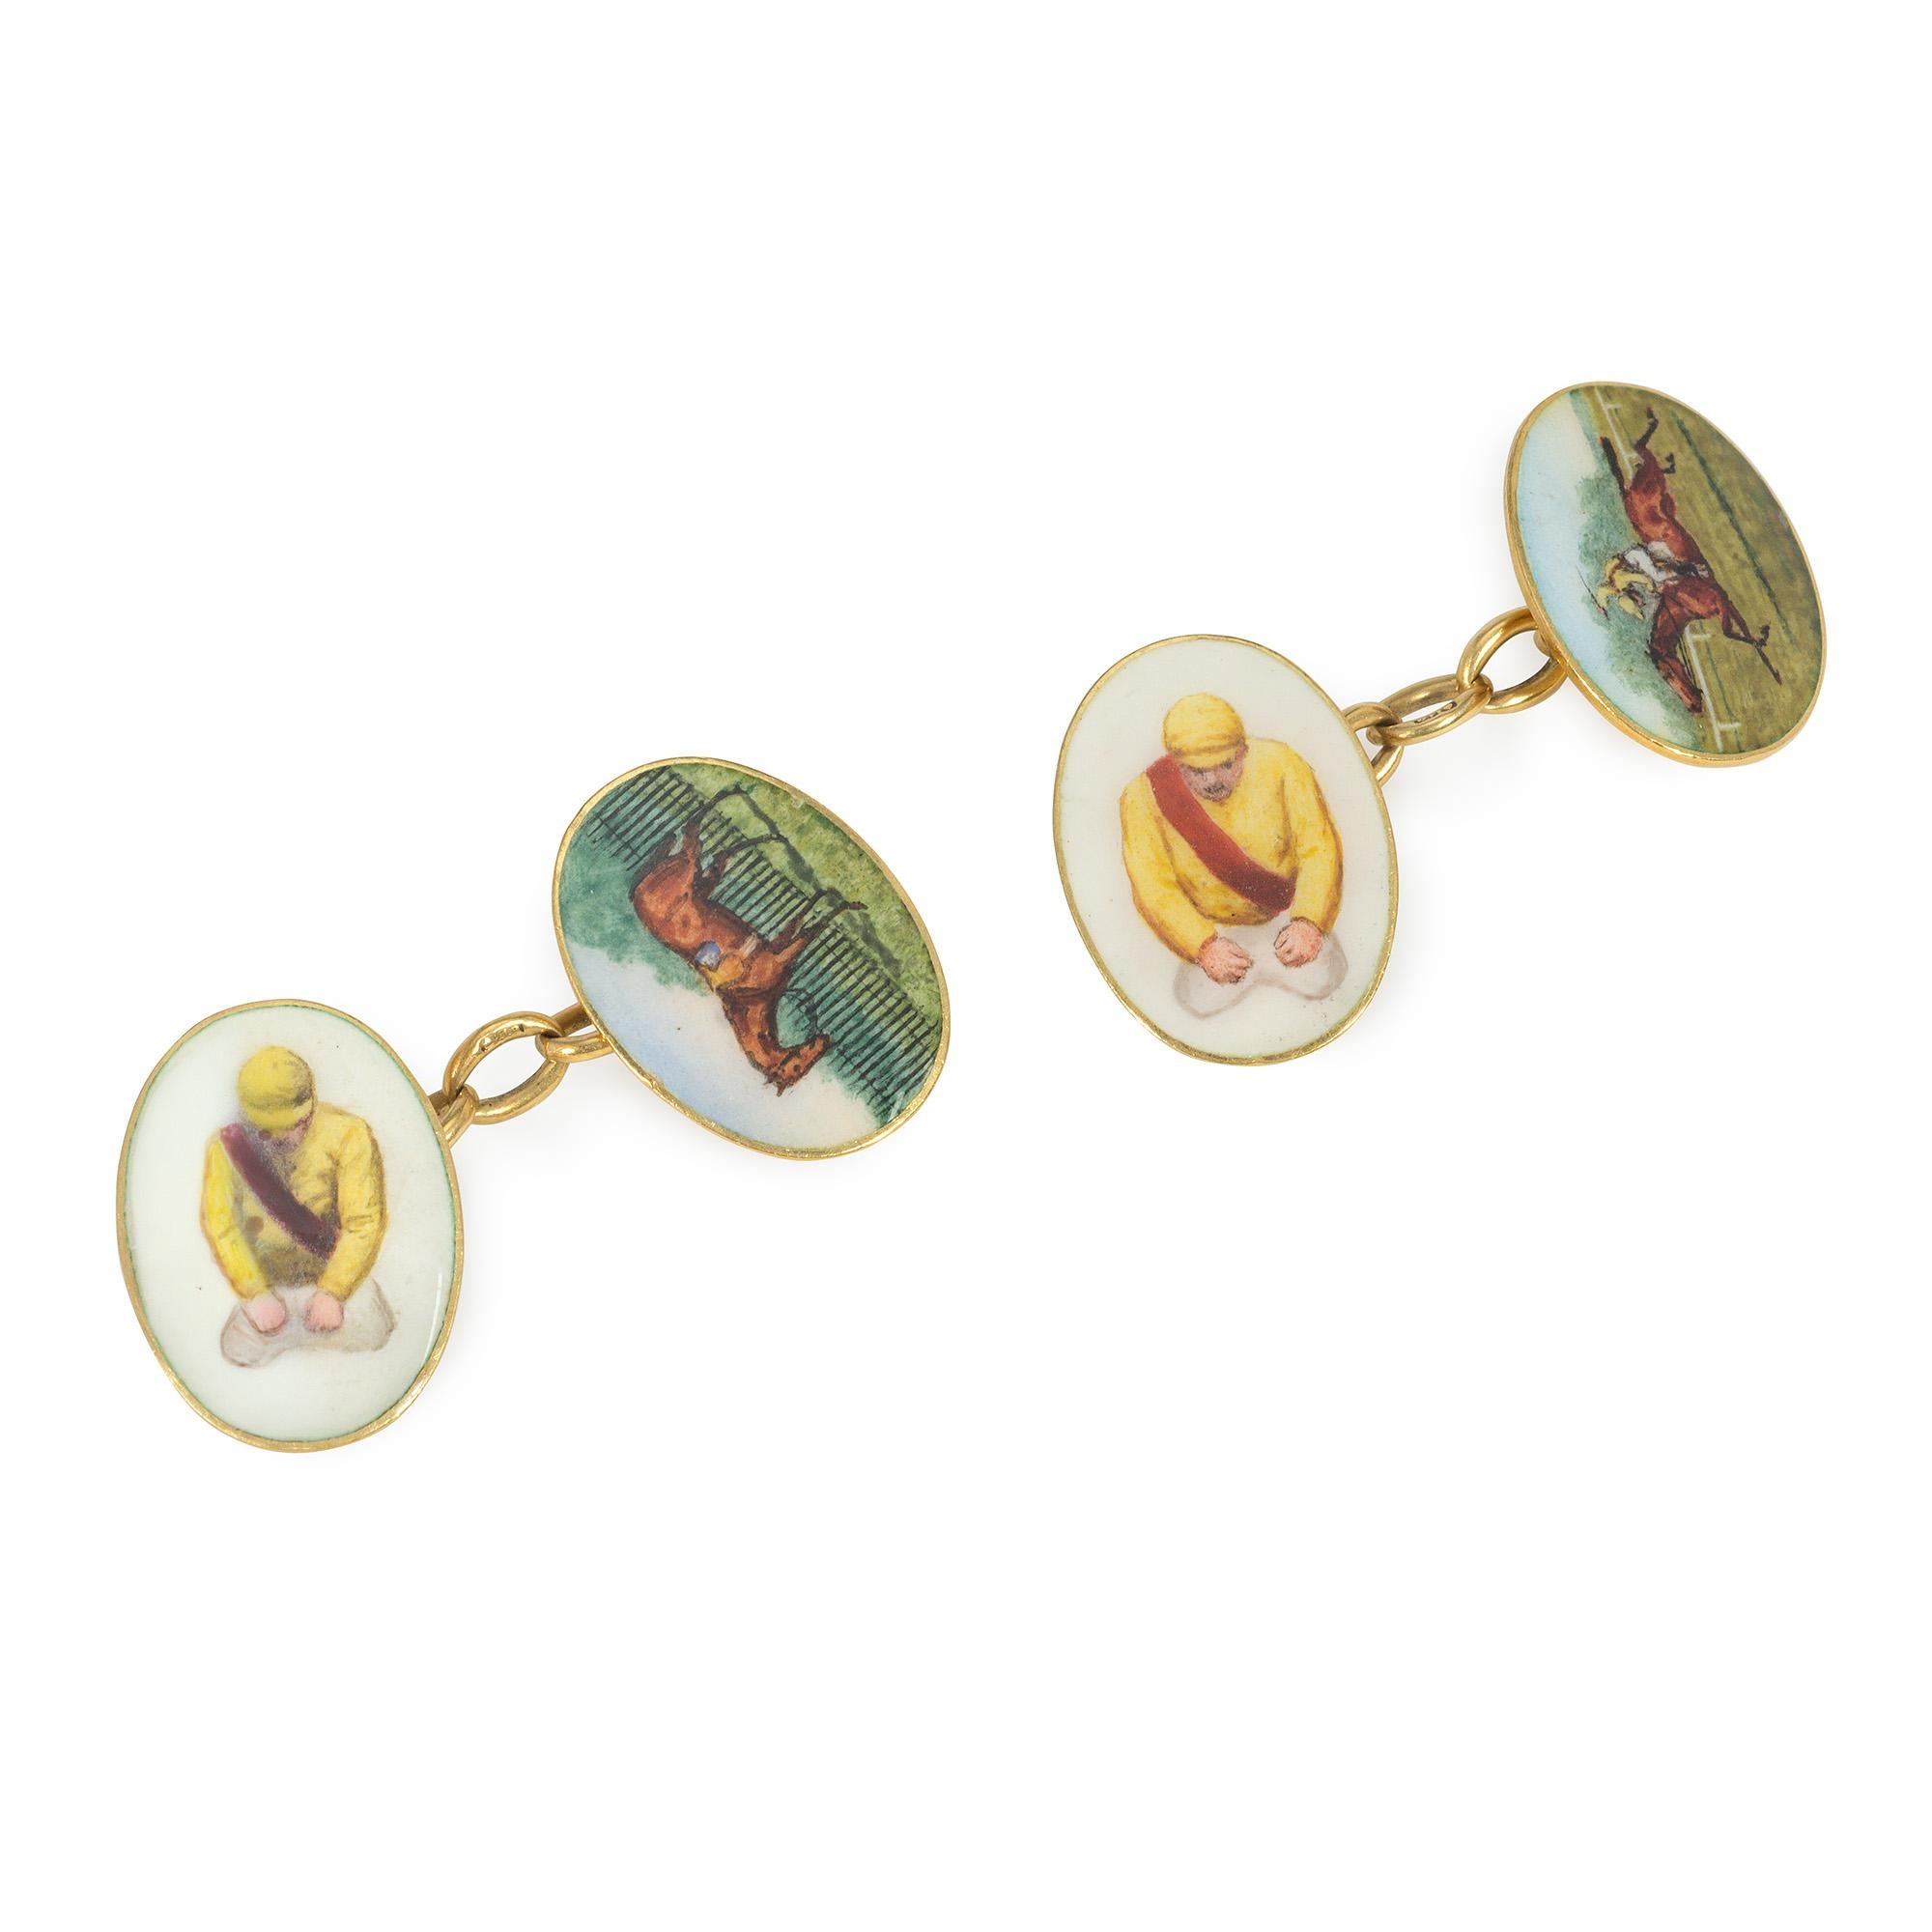 A pair of antique, Victorian period gold and enamel oval double-sided sporting cufflinks with chain link joiners, each cufflink featuring a painted jockey on one side and a racehorse on the other, in 18k.